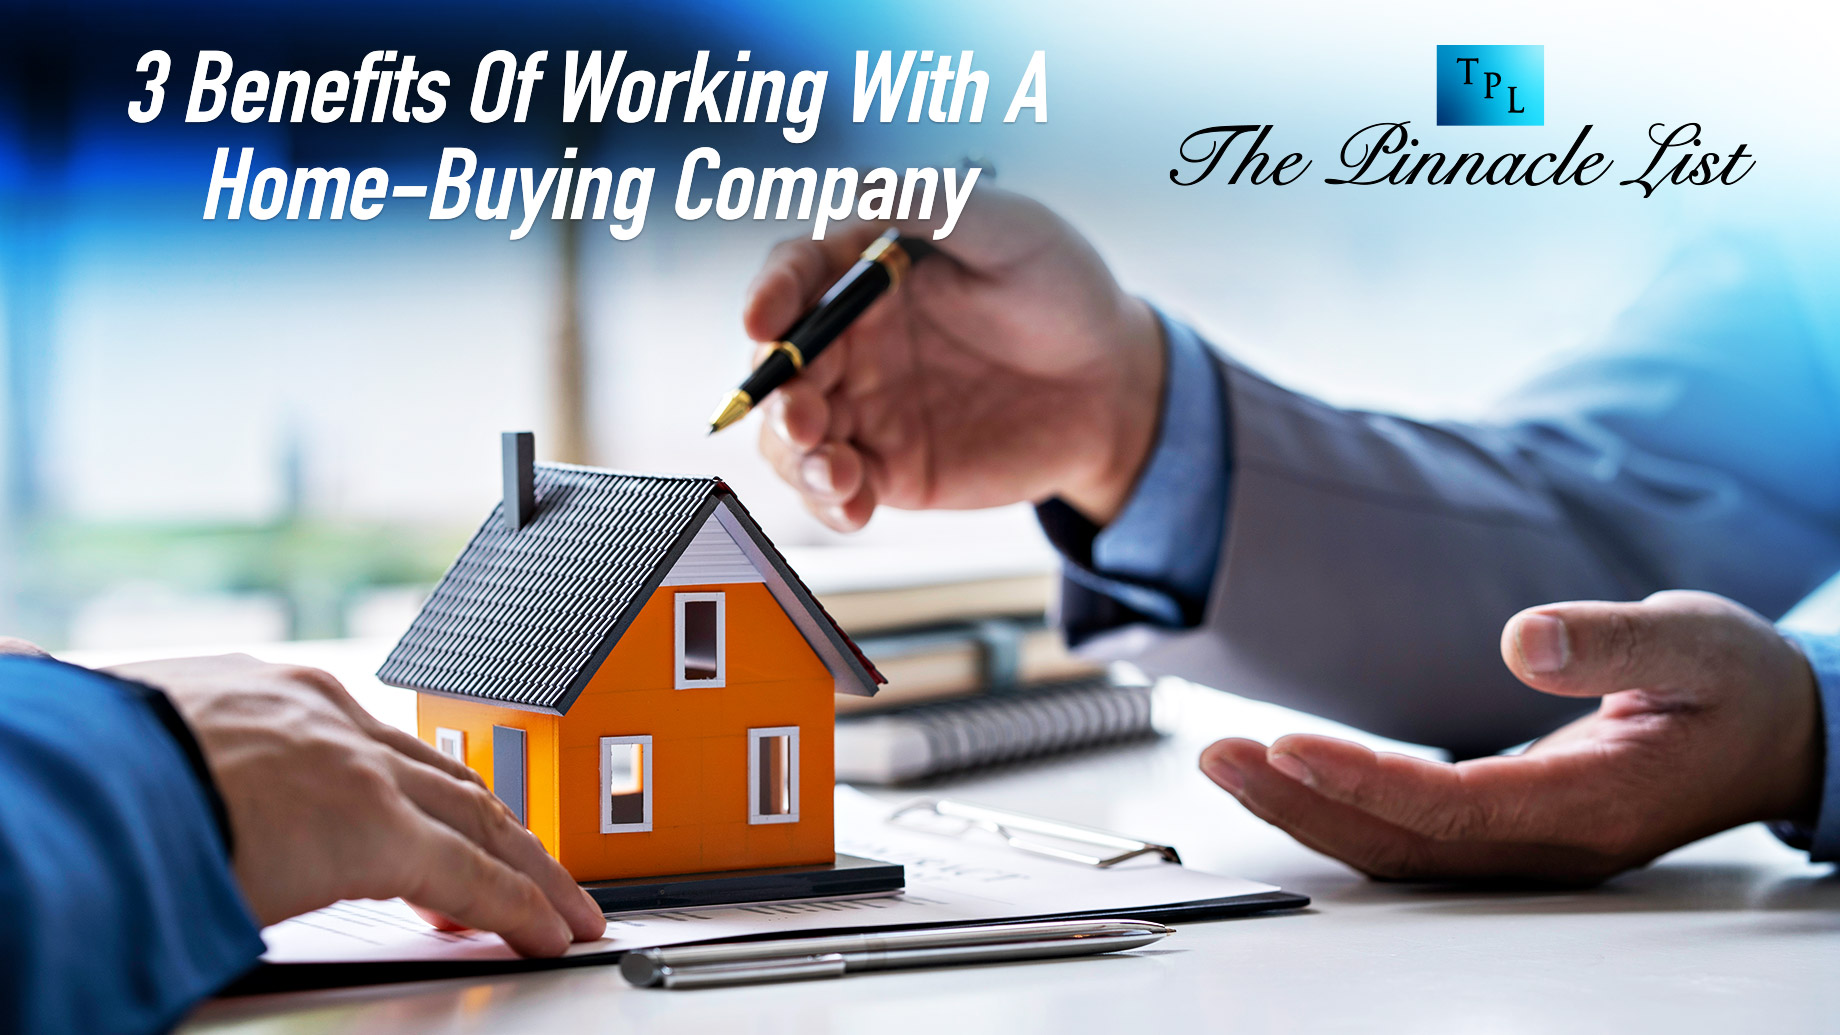 3 Benefits Of Working With A Home-Buying Company